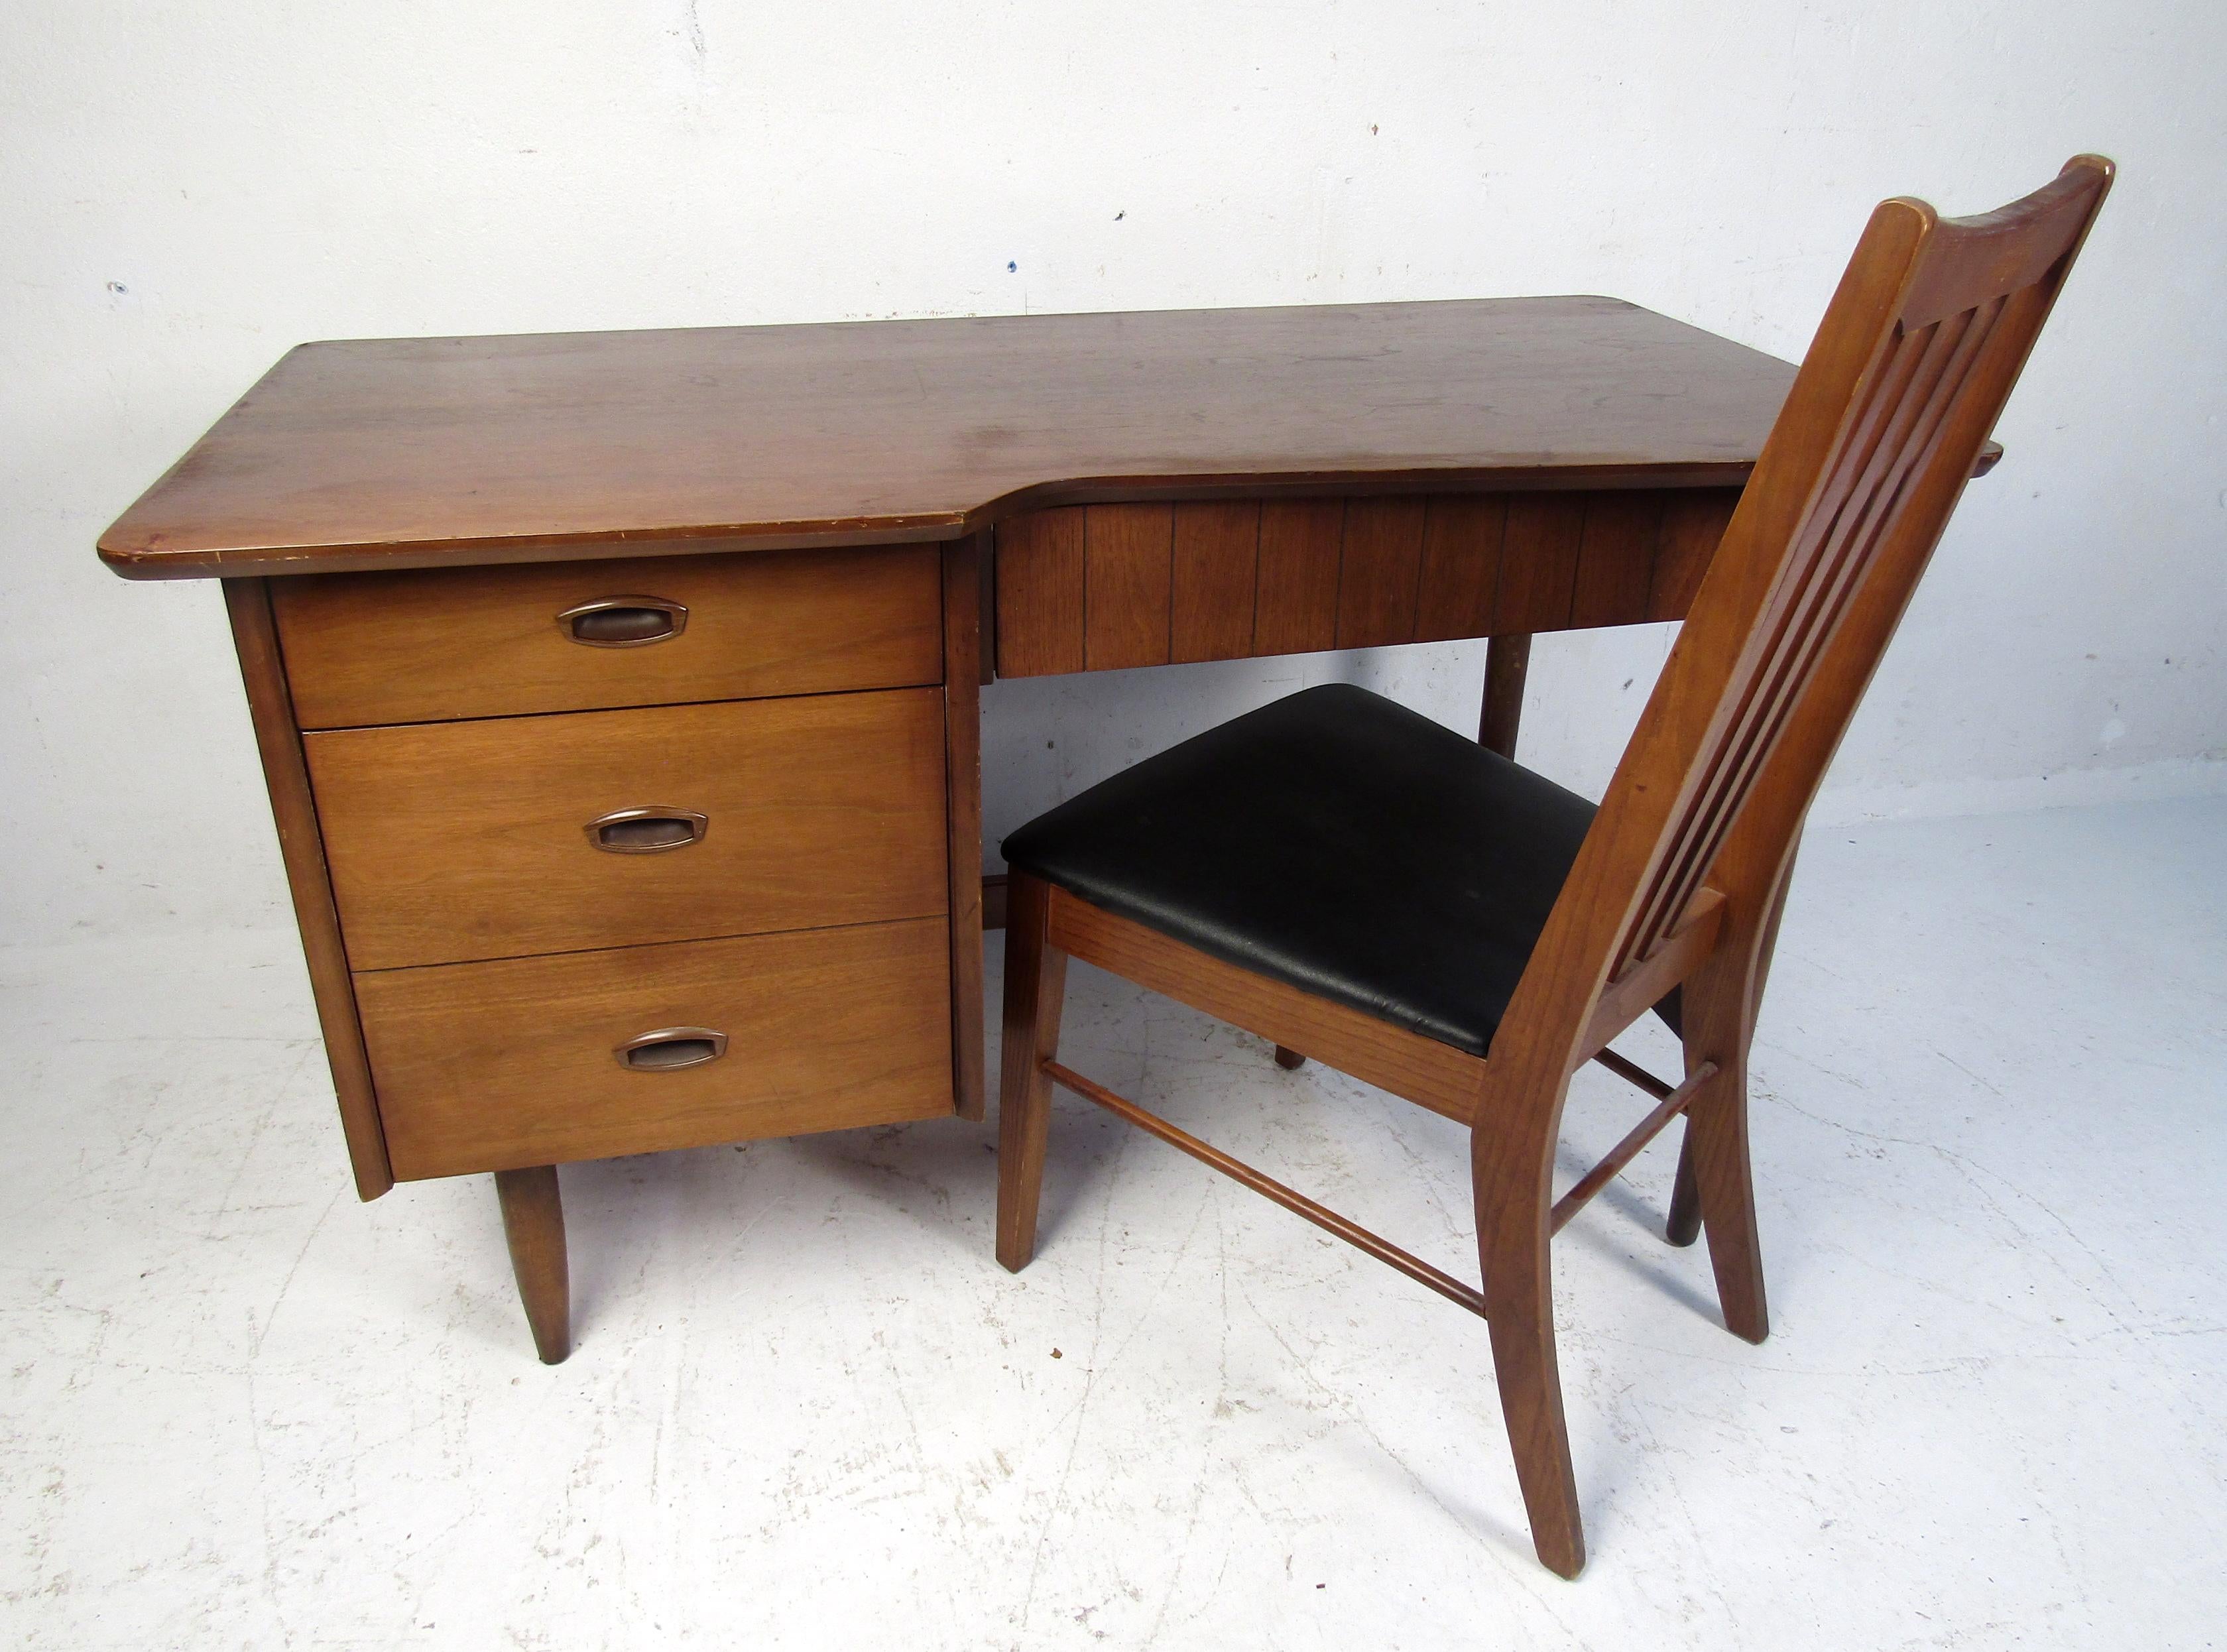 Vintage modern desk and chair featuring rich walnut grain, 3 drawers for storage or documents, comfortable desk chair with a slat back and vinyl cushion.

Chair dimensions: 18.25 W x 22 D x 37 H
SH: 17
Please confirm item location (NJ or BK).